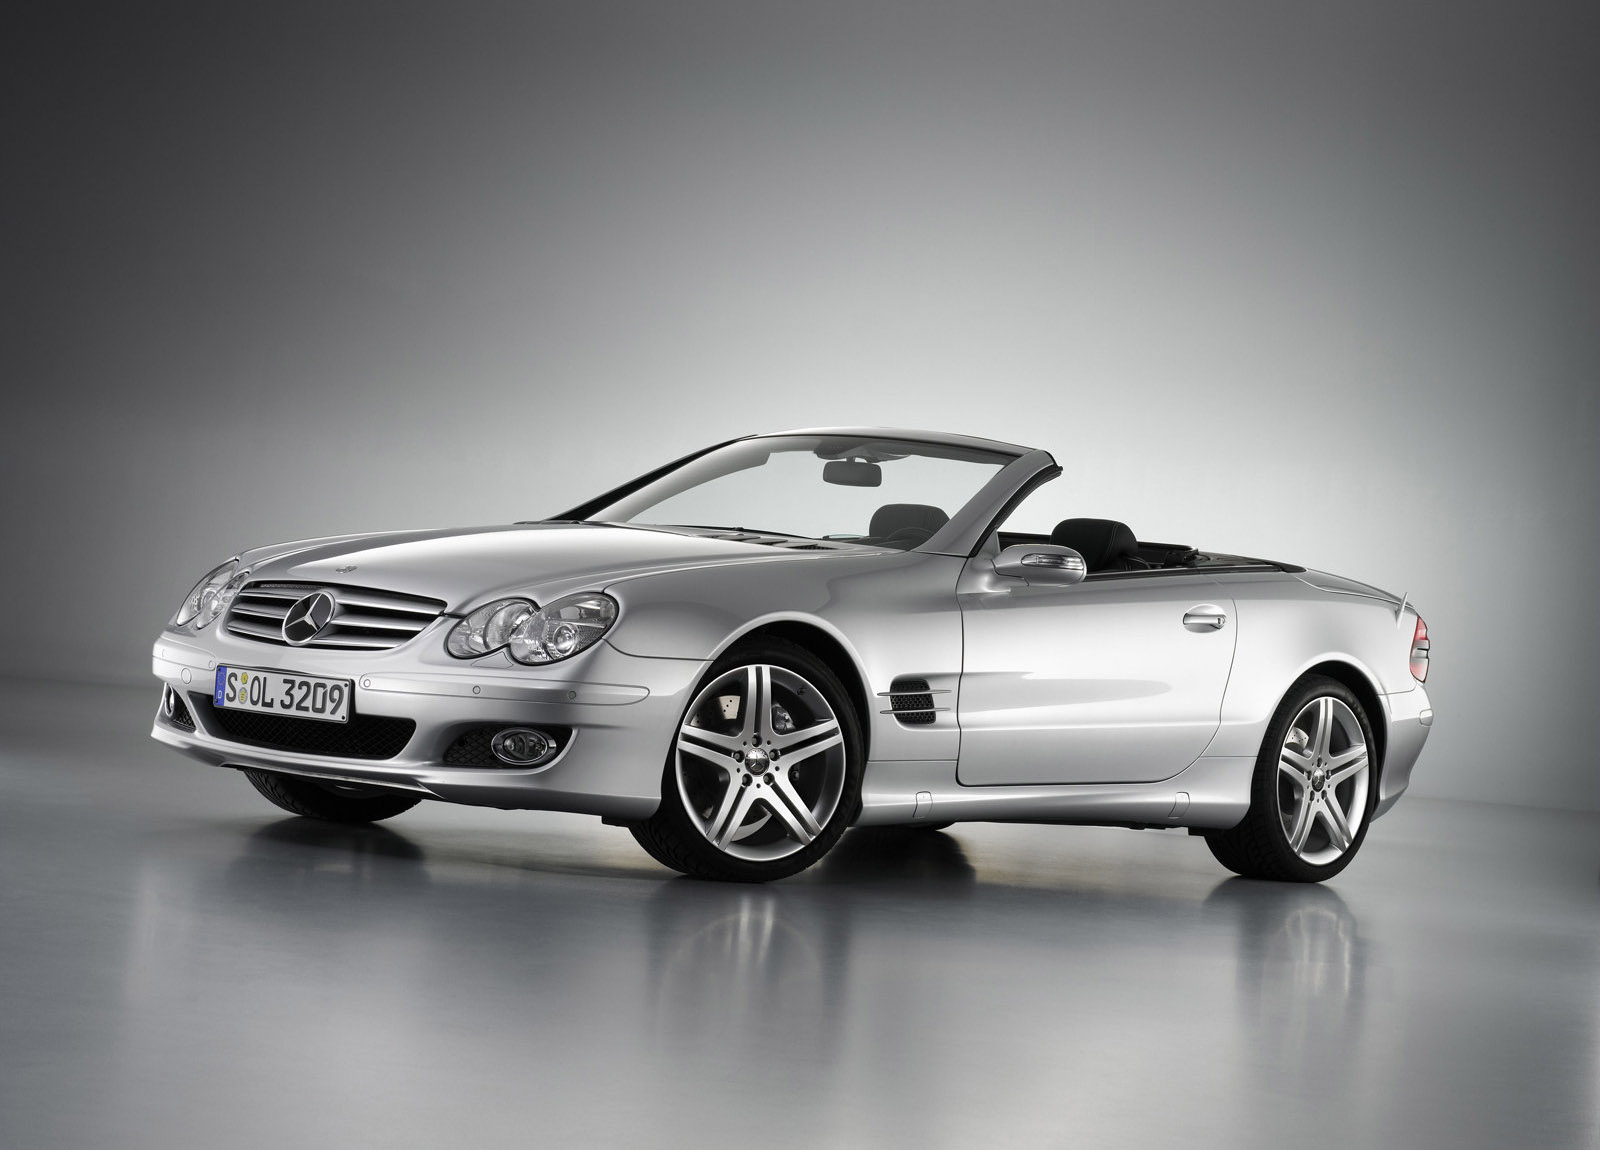 2007 Mercedes-Benz SL-Class Sports Package - HD Pictures @ carsinvasion.com